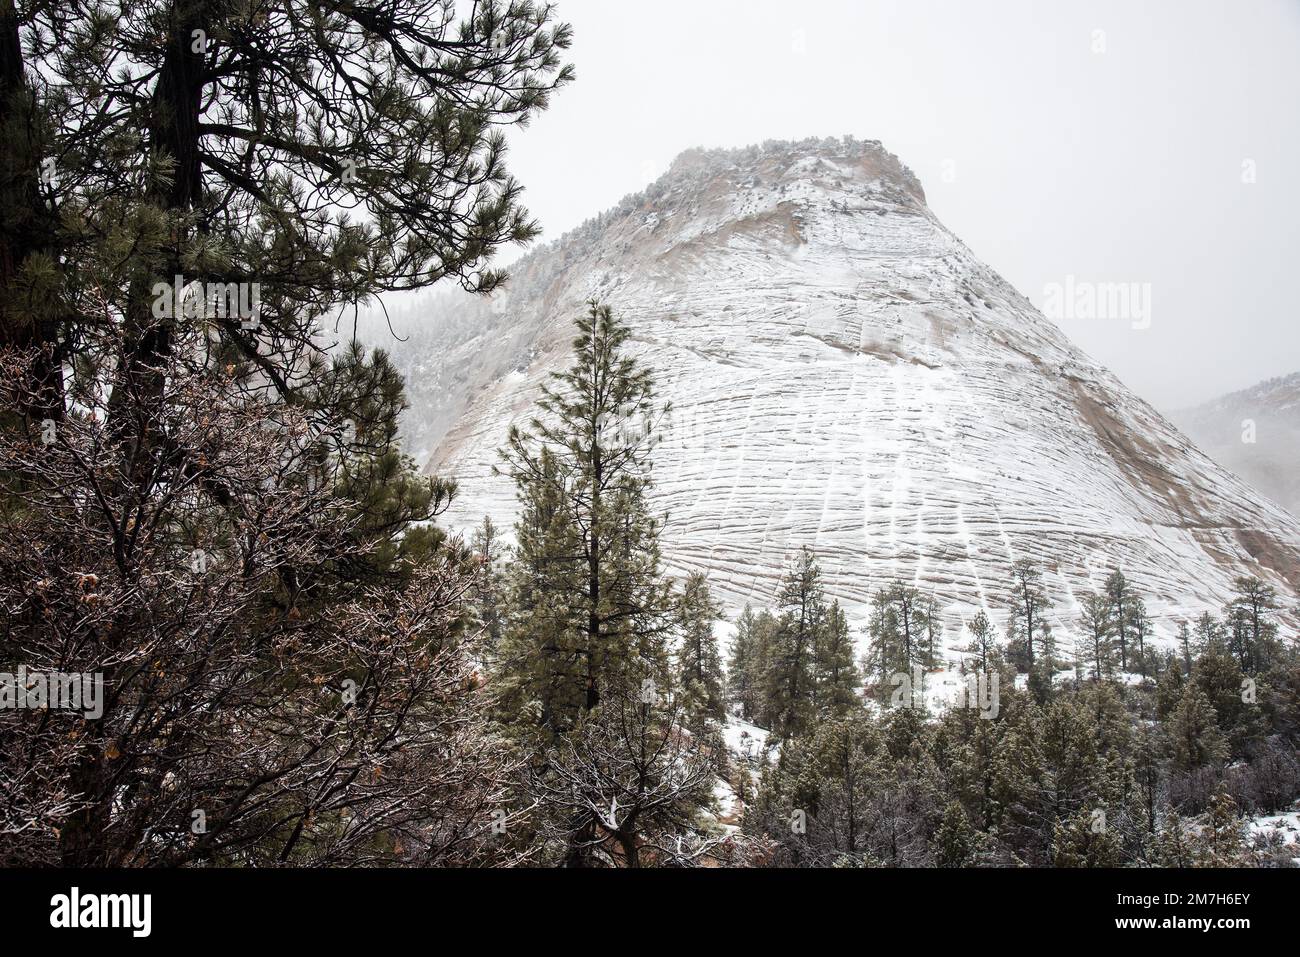 Checkerboard Mesa covered in snow, Zions National Park, Utah, USA. This is one of hundreds of geological features in the park. Stock Photo